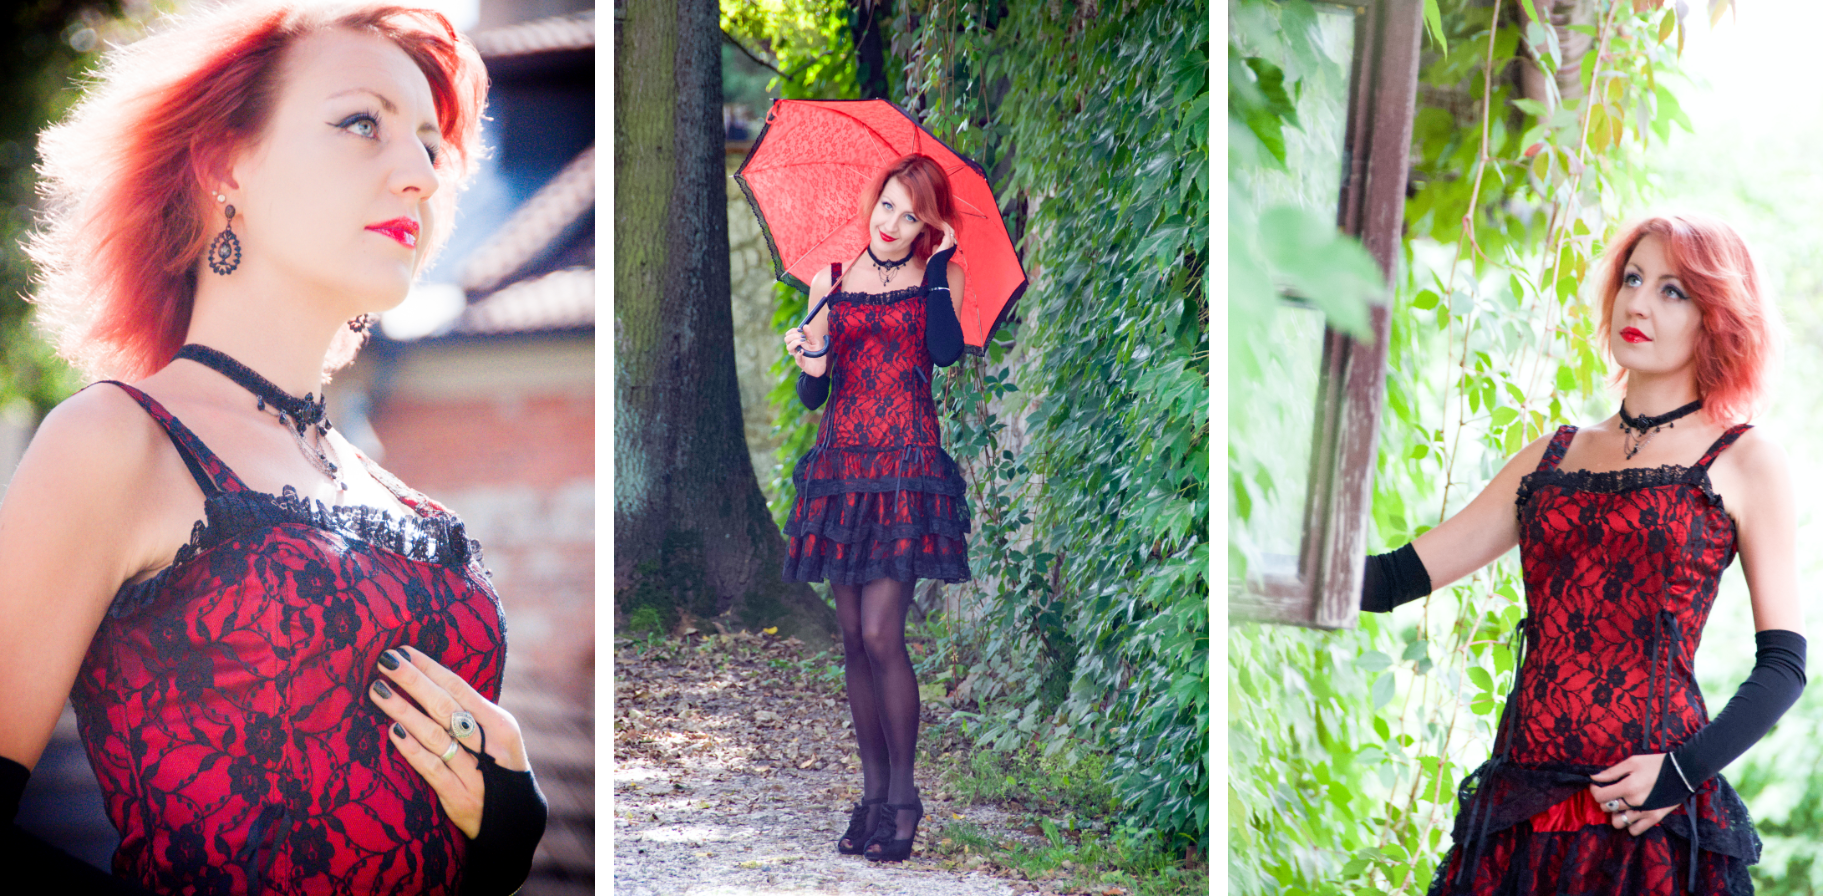 3 Portraits of a young woman in a red dress standing in front of ivy covered castle walls